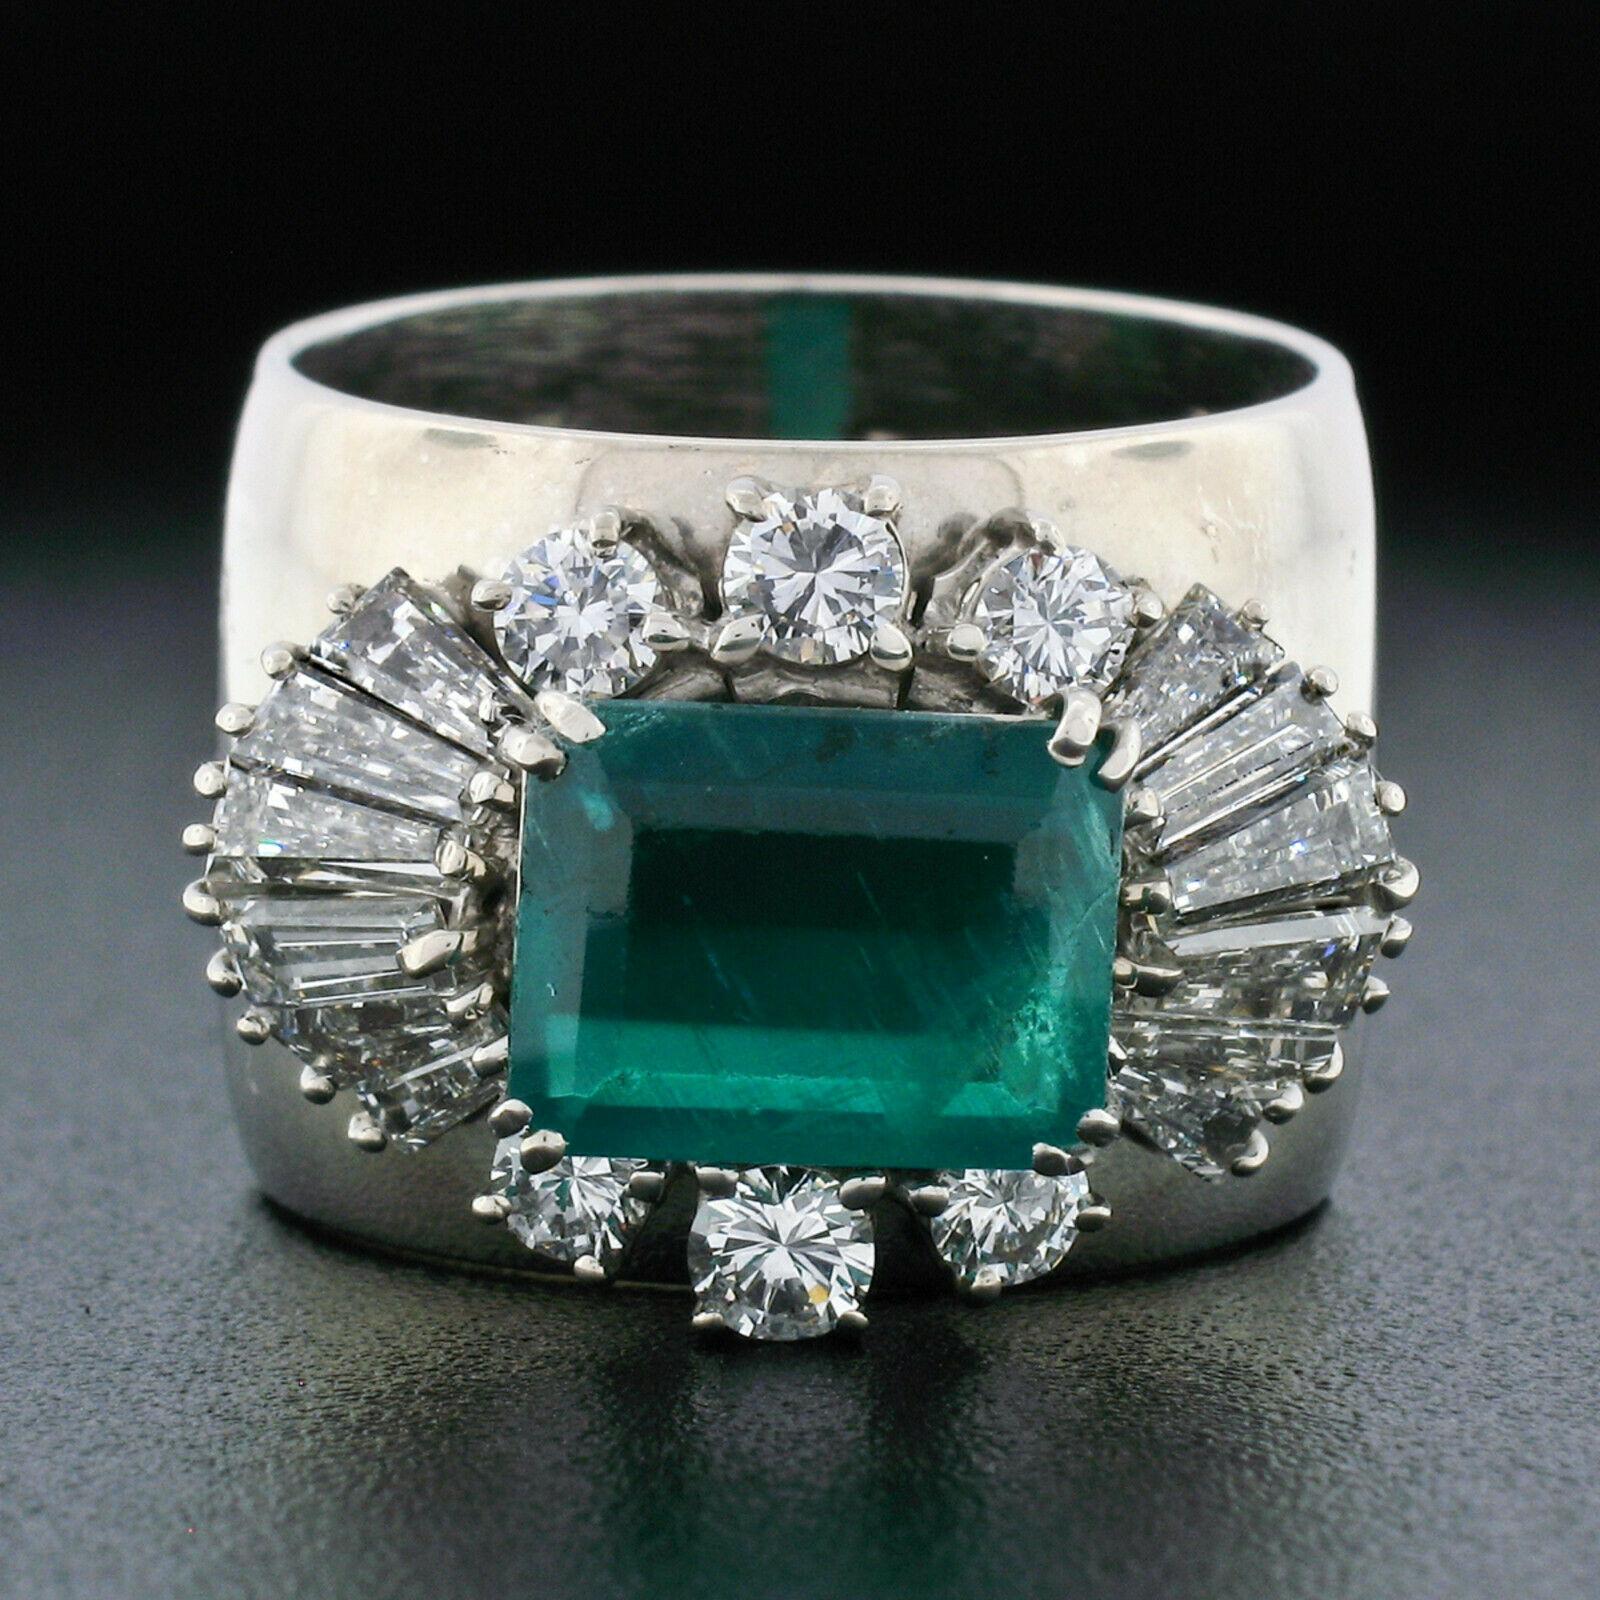 This truly breathtaking, GIA certified, vintage emerald and diamond cocktail ring was crafted in Italy from solid 18k white gold by F. Moroni. The ring features an outstanding, natural, octagonal step cut emerald that displays a fine and deep green